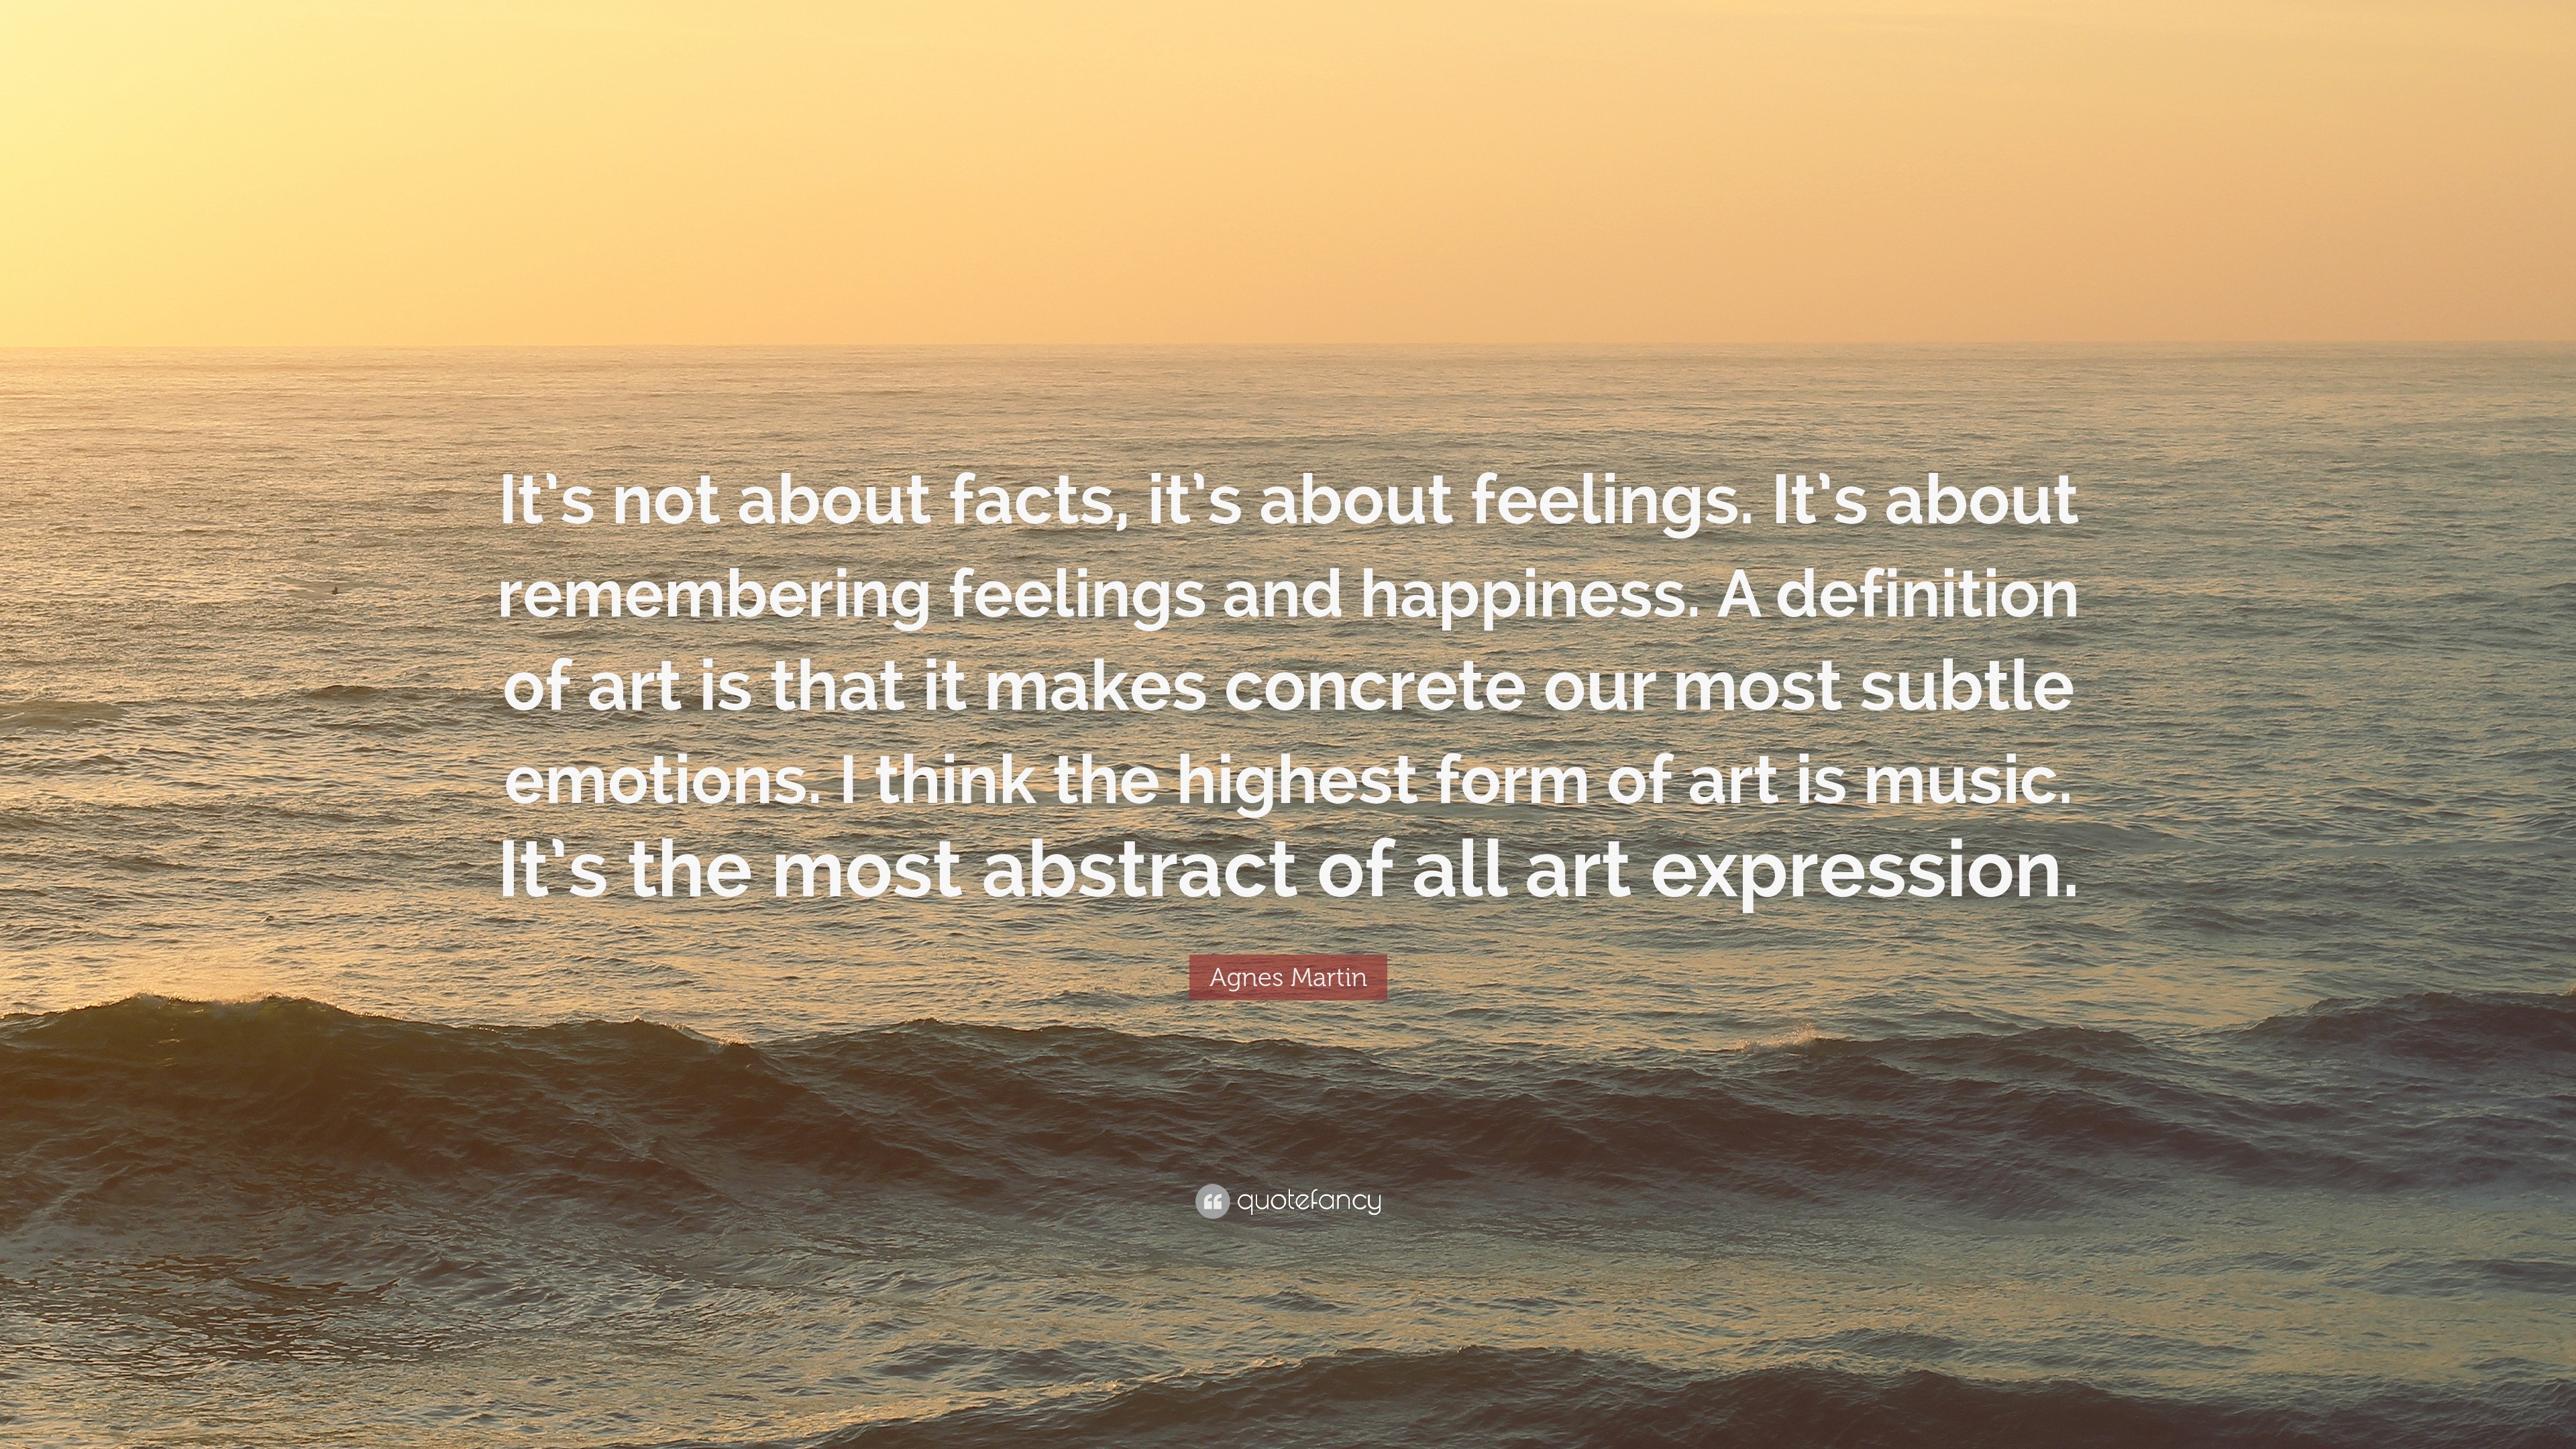 https://quotefancy.com/media/wallpaper/3840x2160/2857584-Agnes-Martin-Quote-It-s-not-about-facts-it-s-about-feelings-It-s.jpg